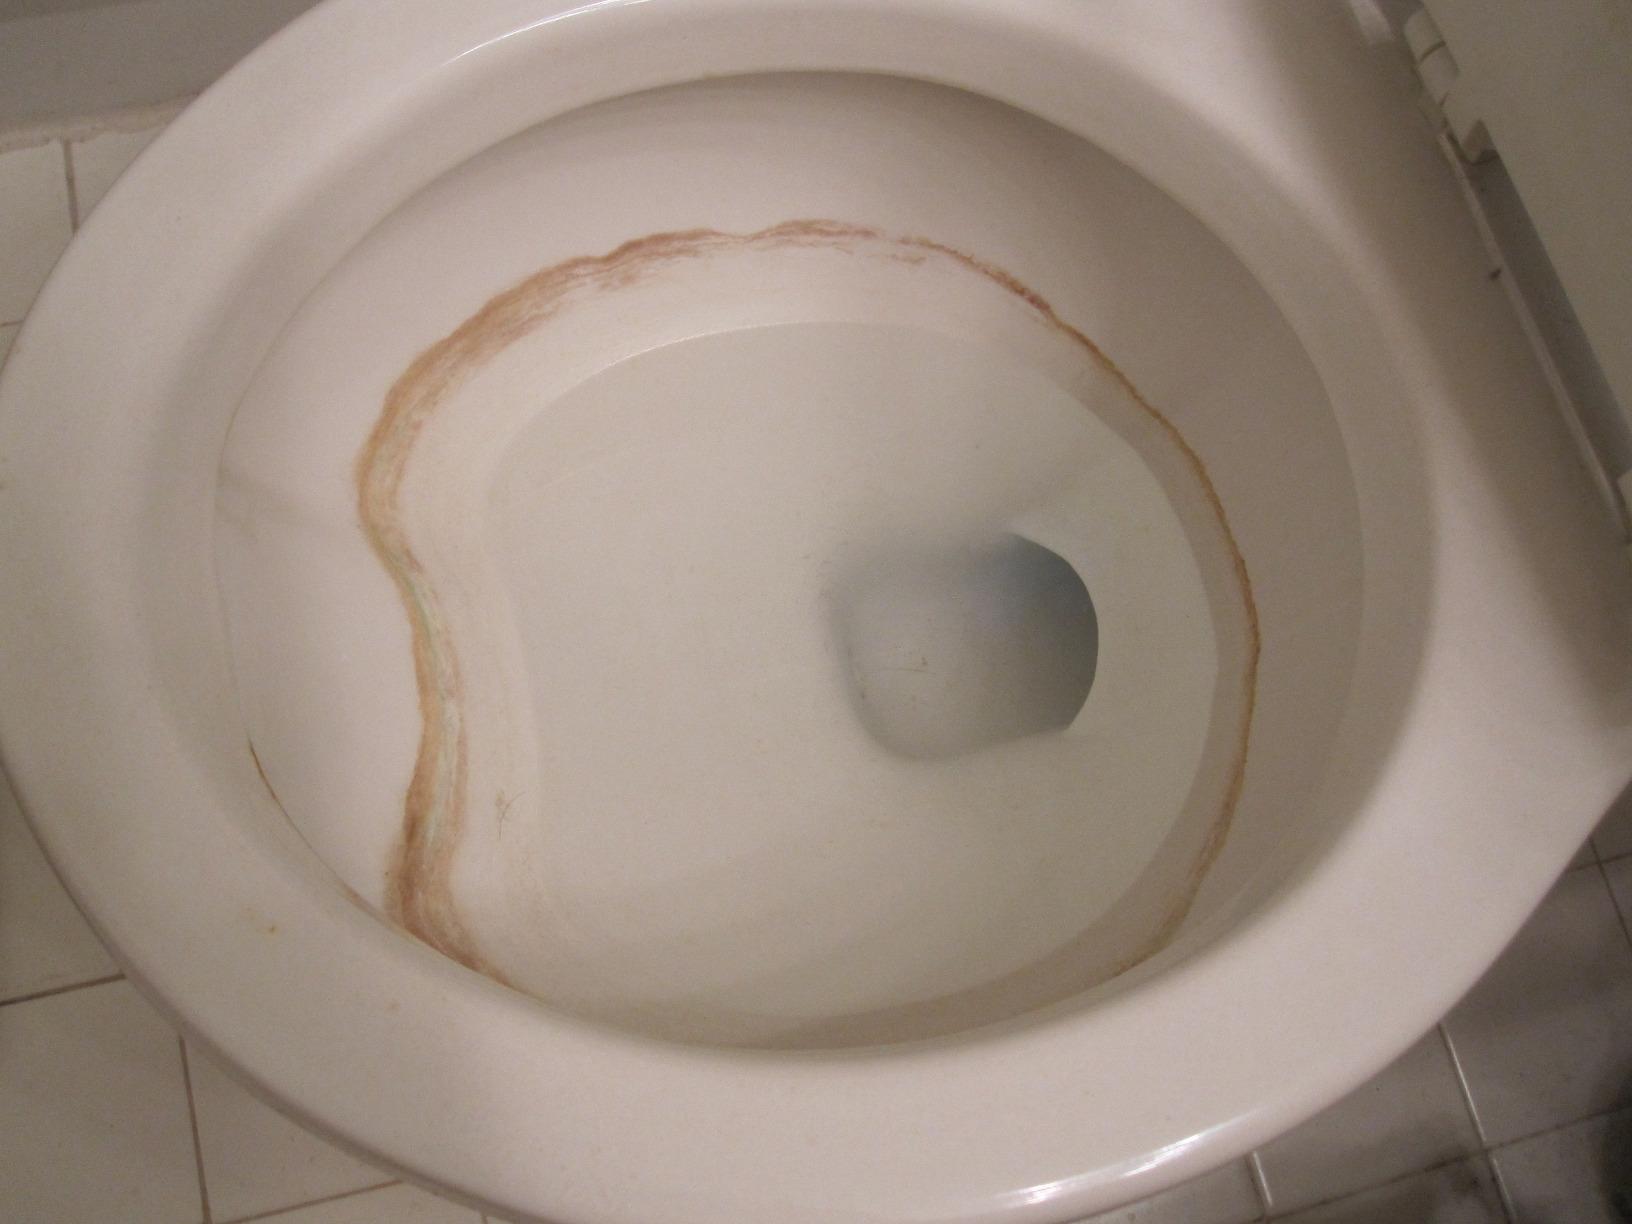 This is Why You Shouldn't Use Drano in Your Toilet - Toilet Haven Can Drano Be Used In A Toilet